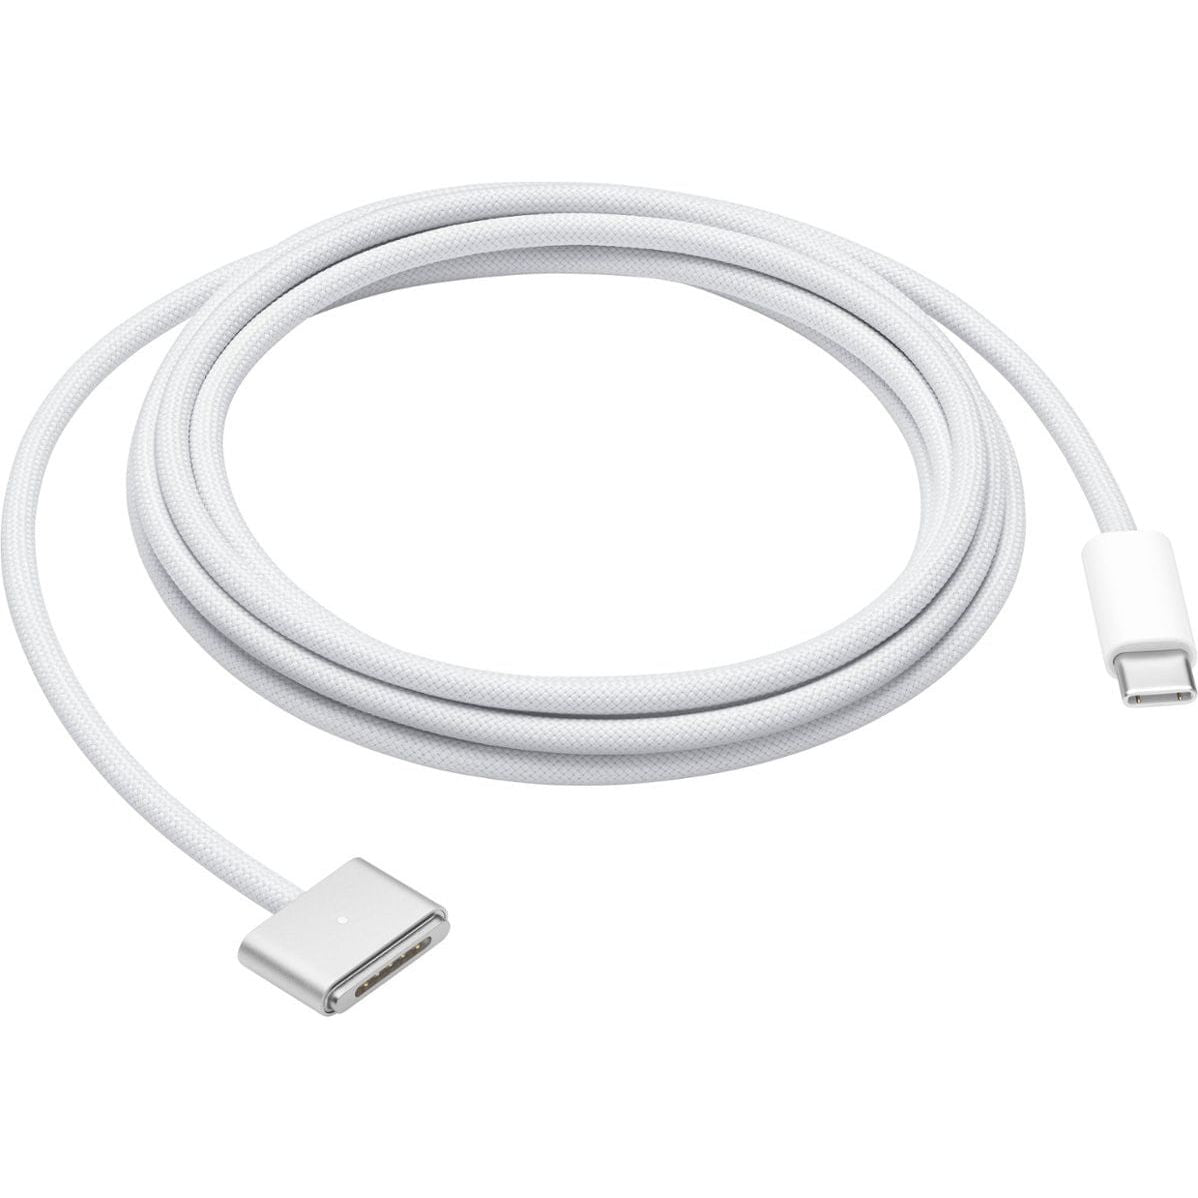 Apple Lightning to USB Cable - 1 meter